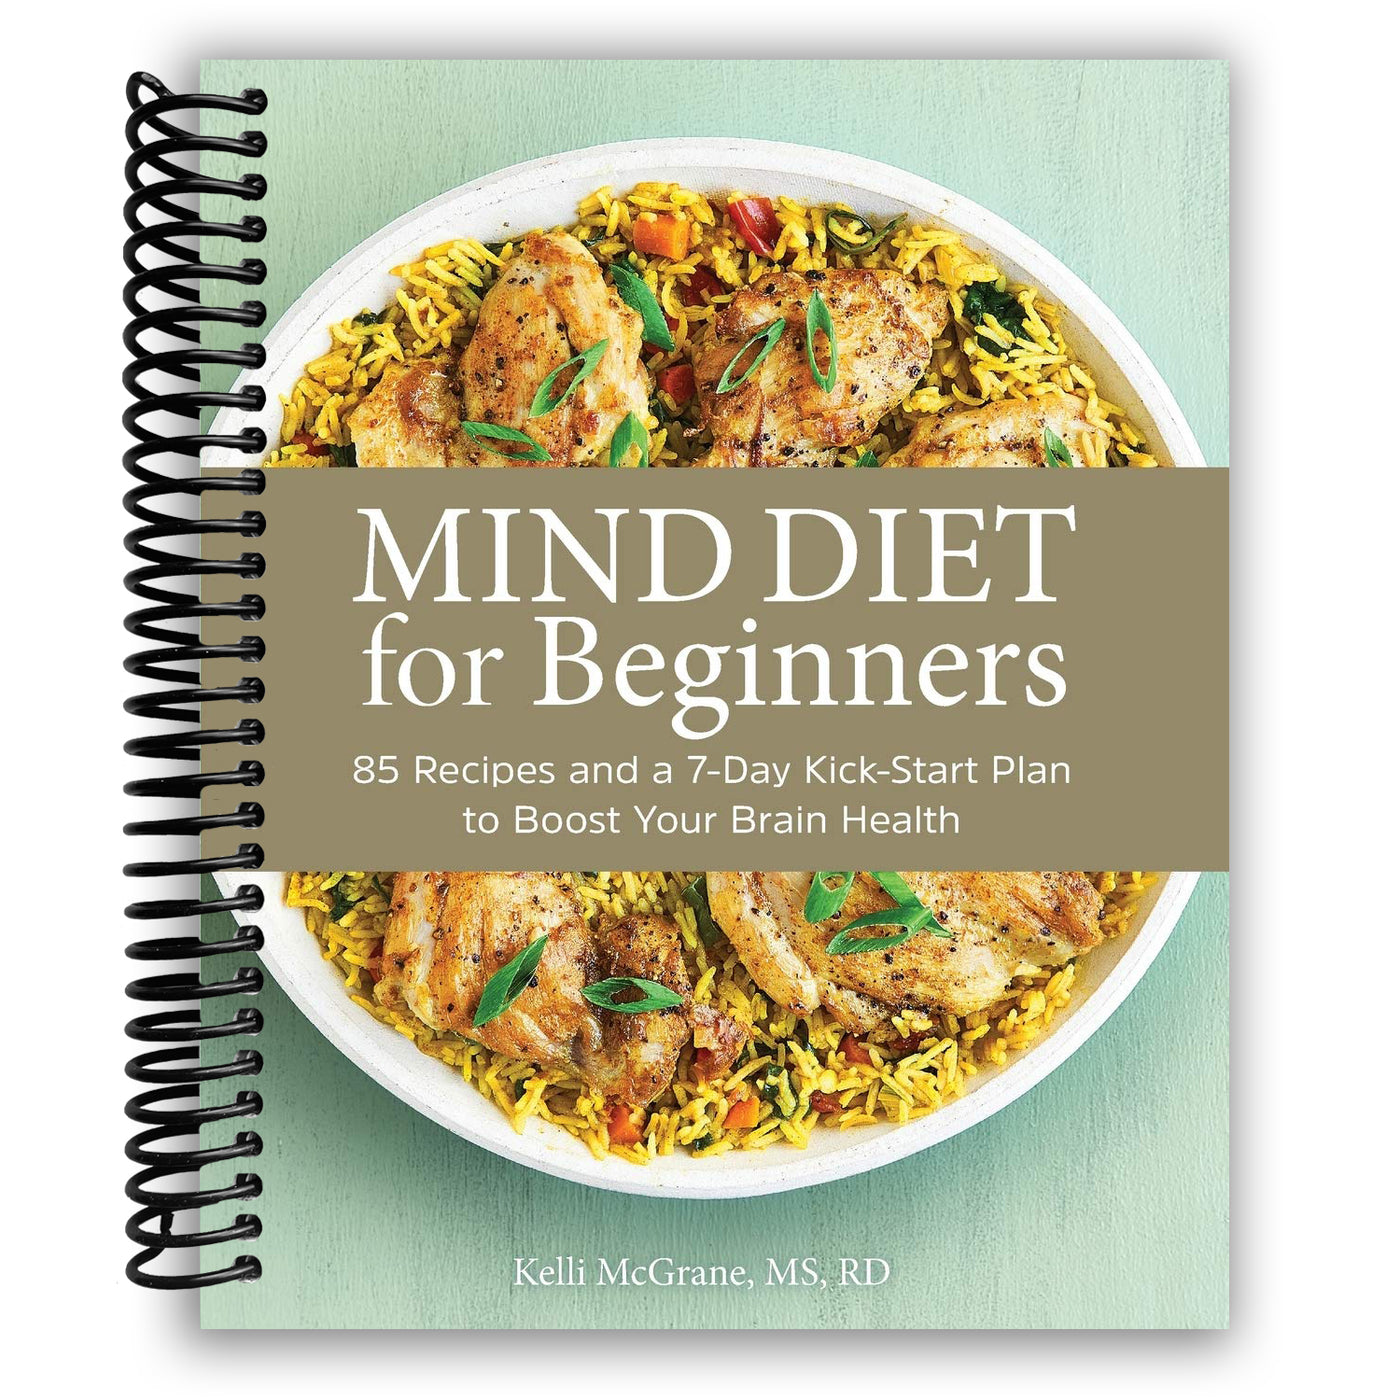 MIND Diet for Beginners: 85 Recipes and a 7-Day Kickstart Plan to Boost Your Brain Health (Spiral Bound)